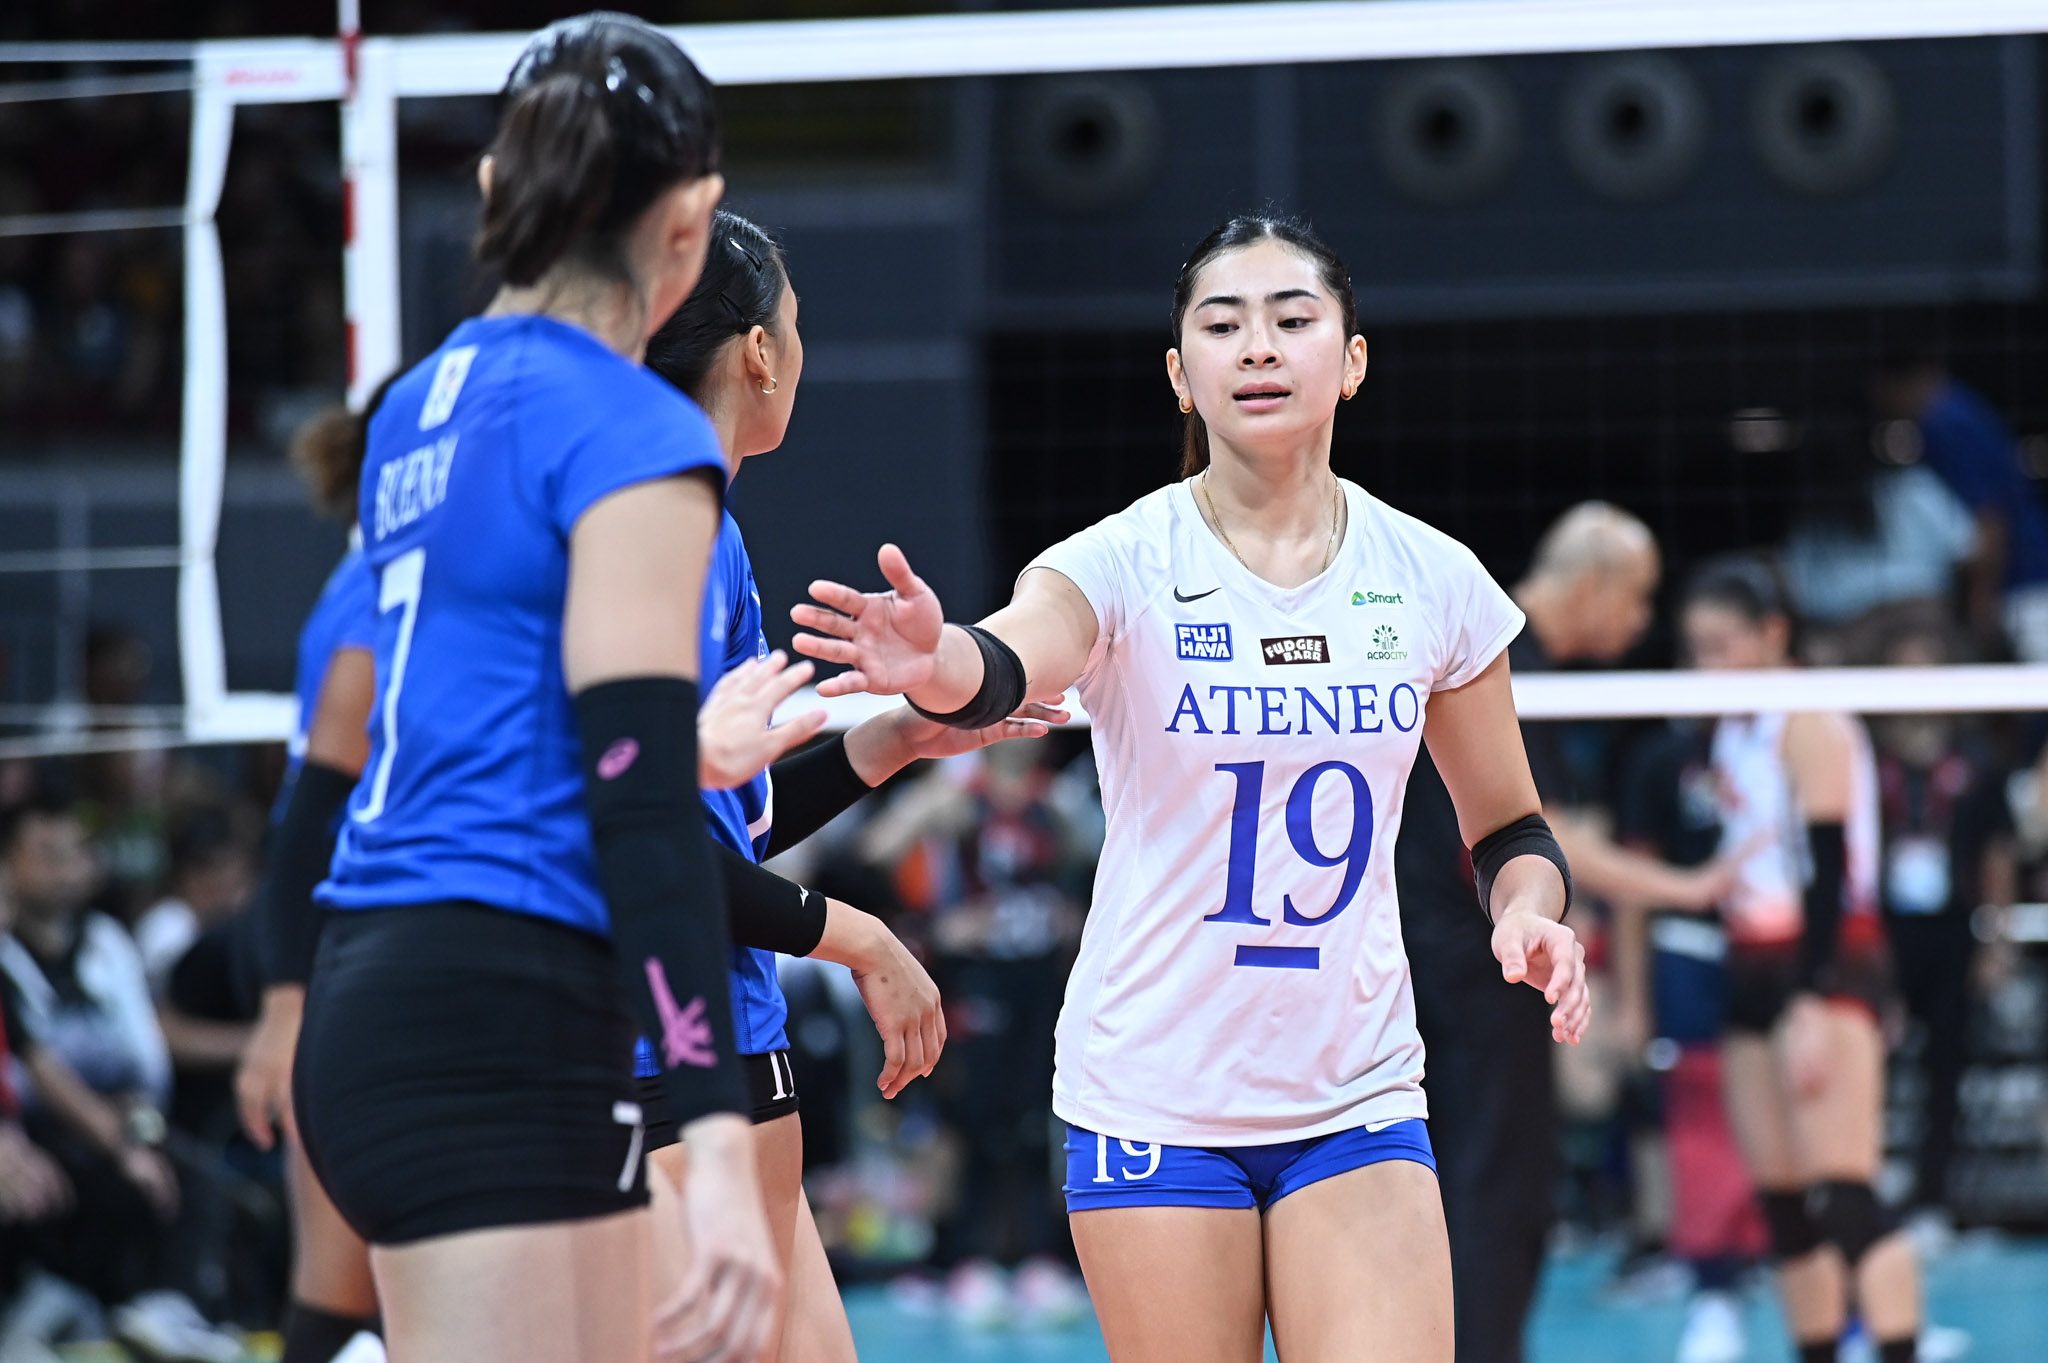 One Big Finish: Roma Doromal cherishes remaining games as Ateneo exits Final Four race